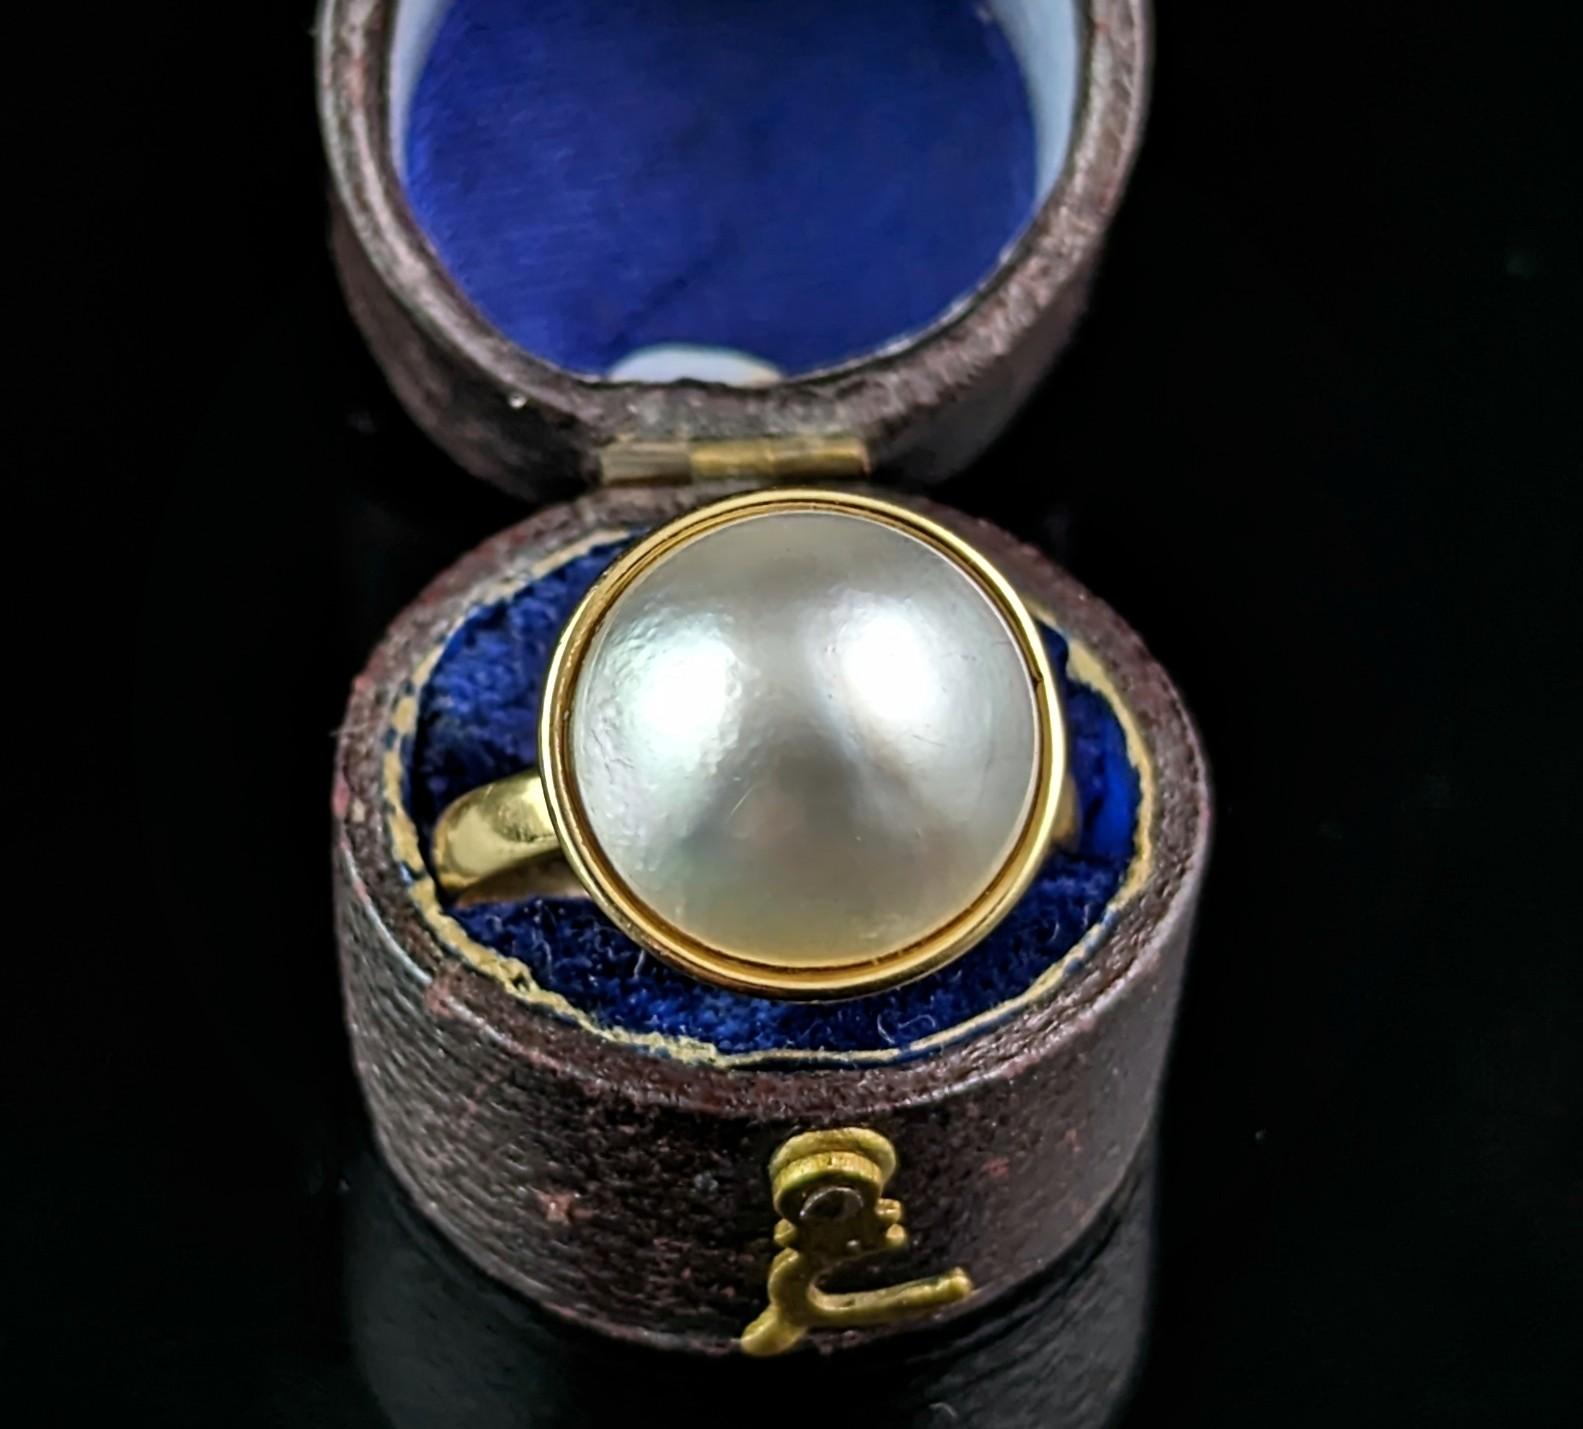 This gorgeous vintage Mabe pearl cocktail ring really makes a statement!

A large lustrous Mabe pearl takes centre stage at the face of the ring, it is in a closed back setting with a rich yellow gold bezel frame.

The band is the same rich 18ct